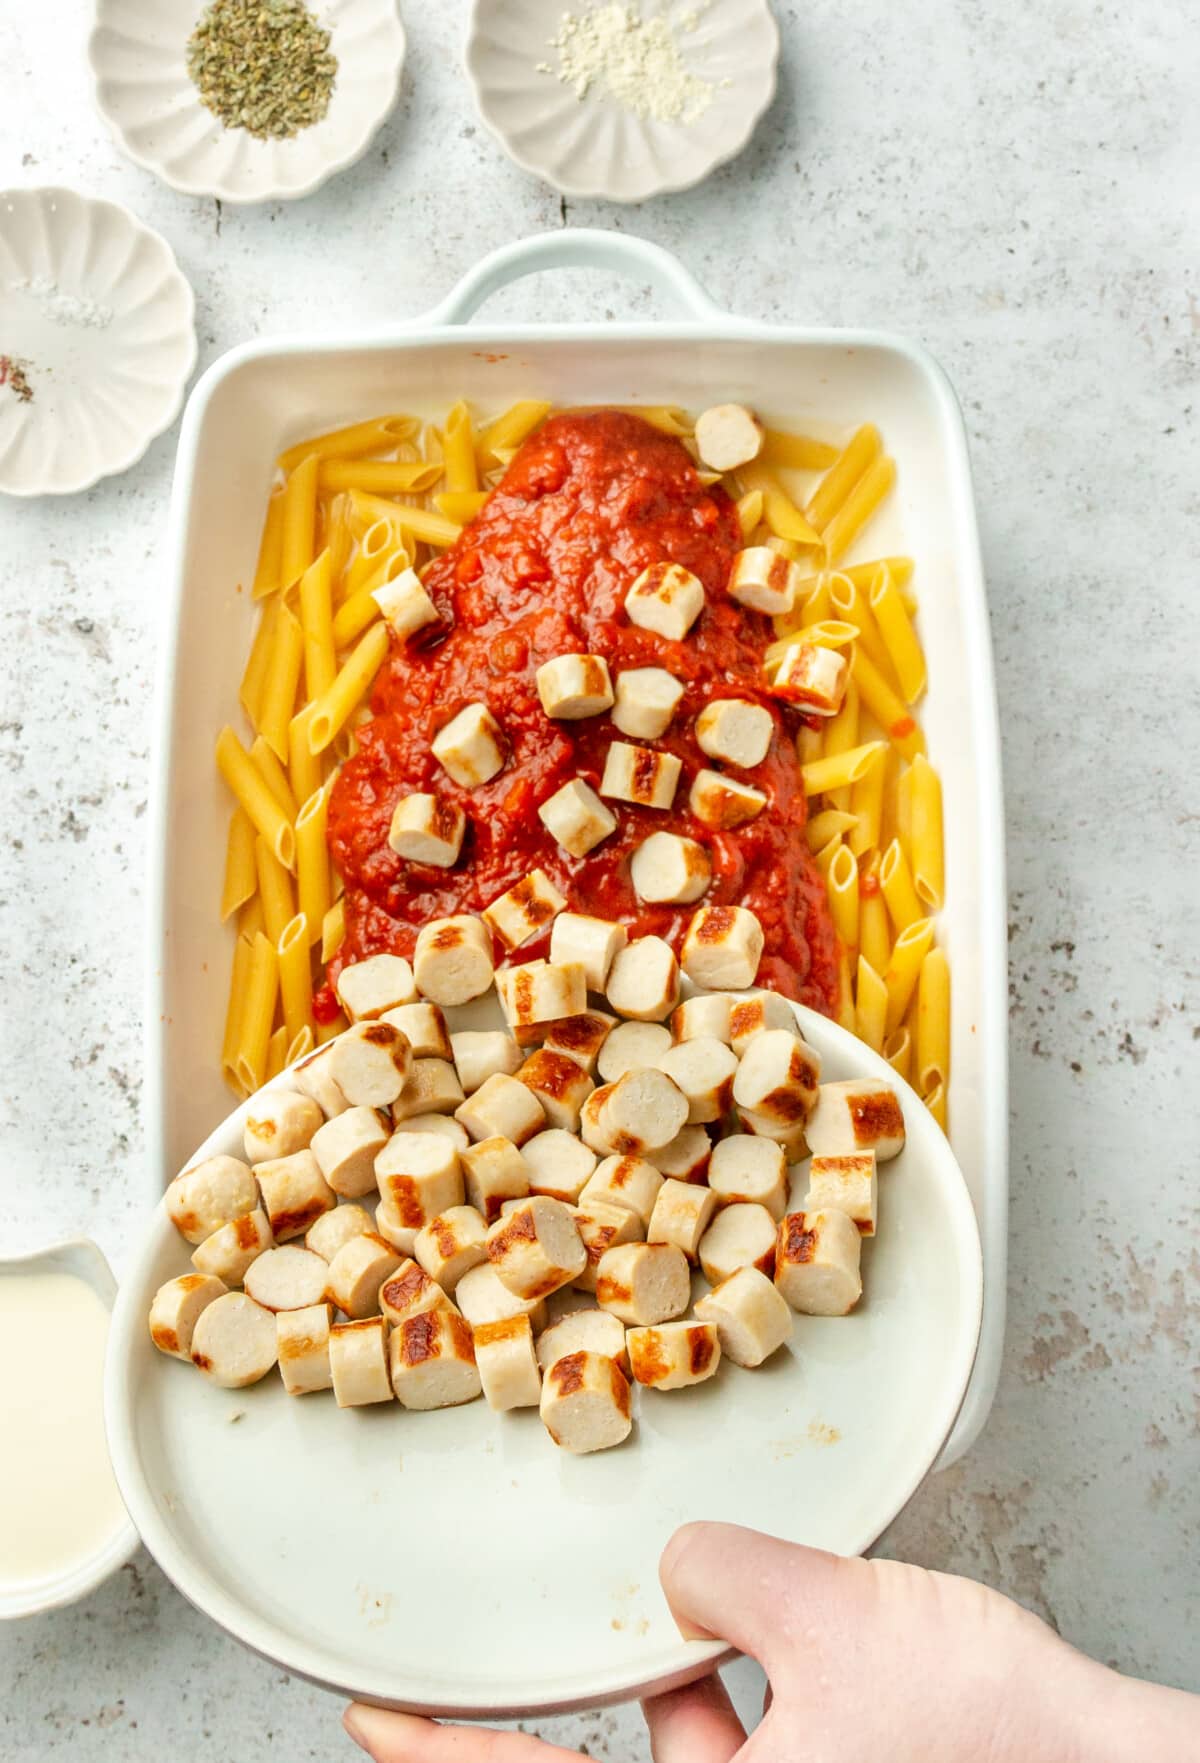 Sliced chicken sausage is tossed over marinara sauce and penne pasta in a baking dish on a light grey colored surface.